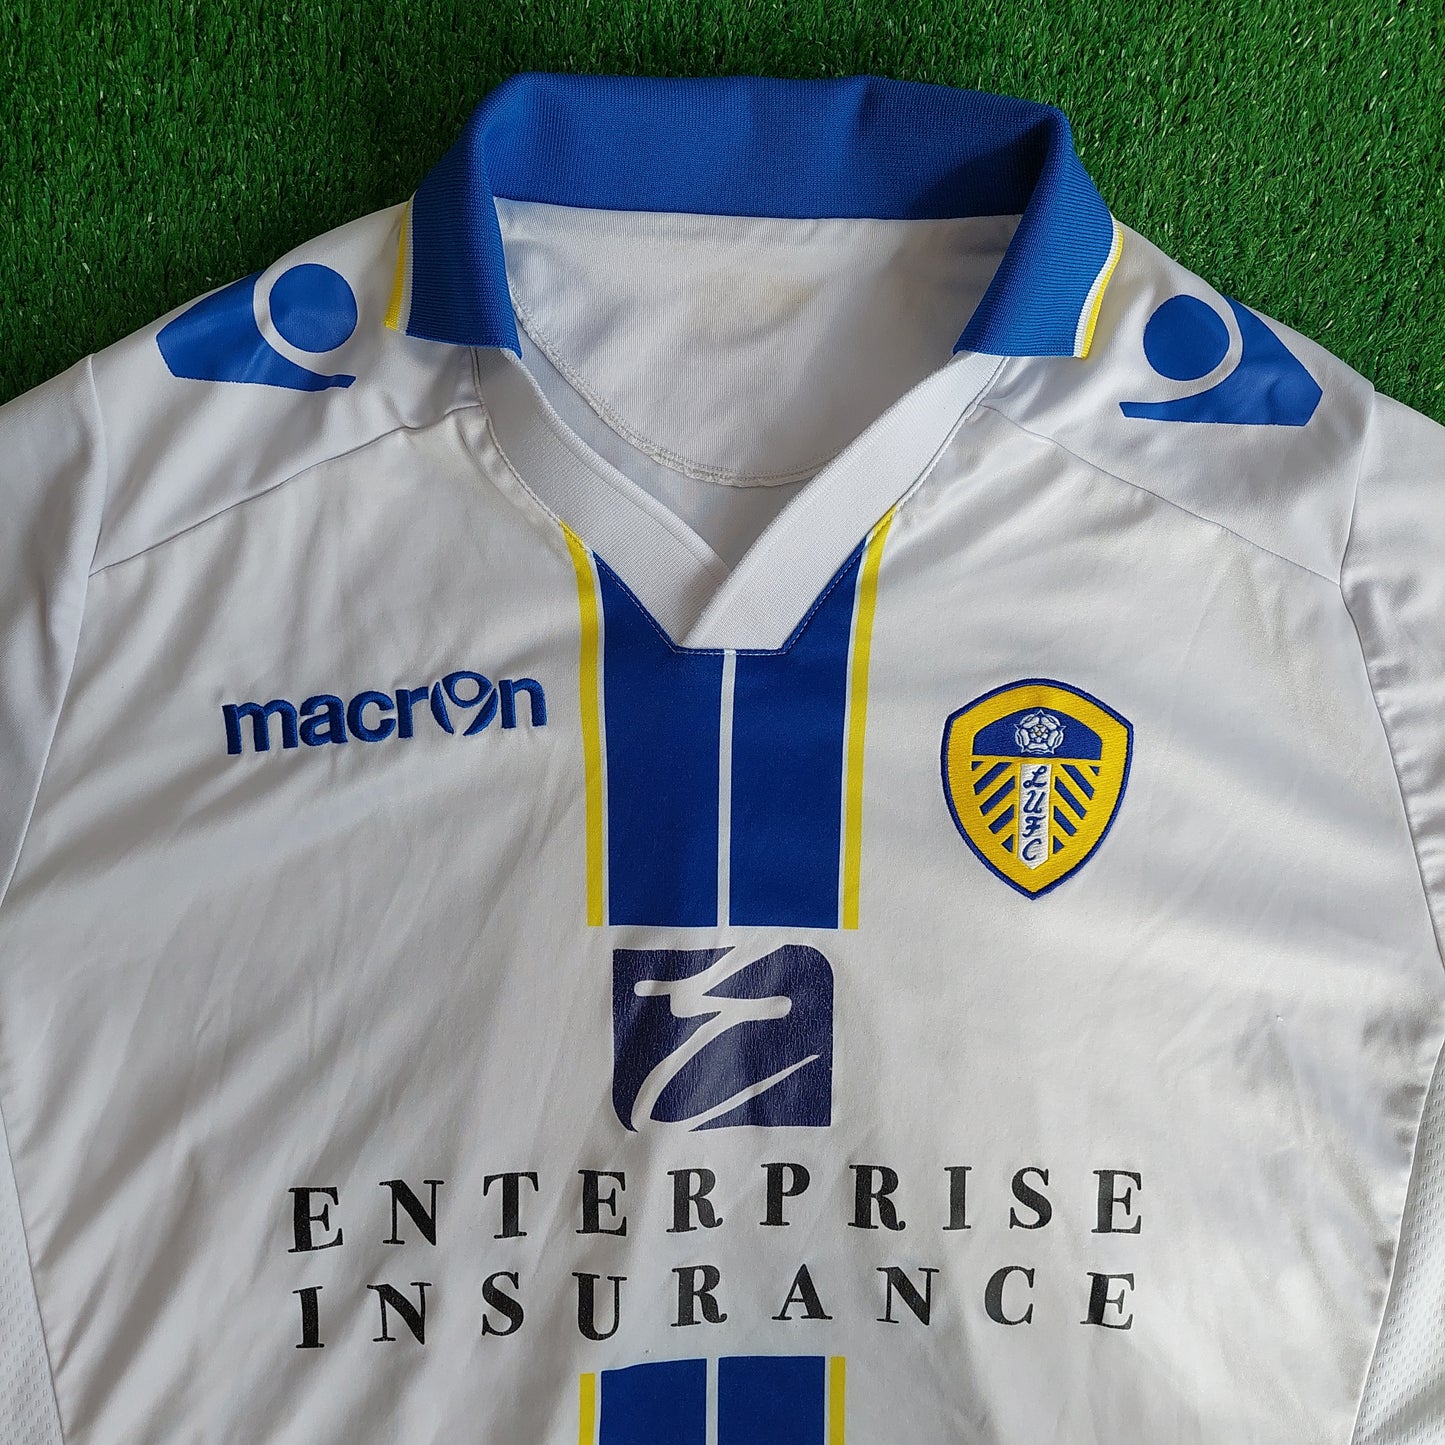 Leeds United 2013/14 Home Shirt (Very Good) - Size M